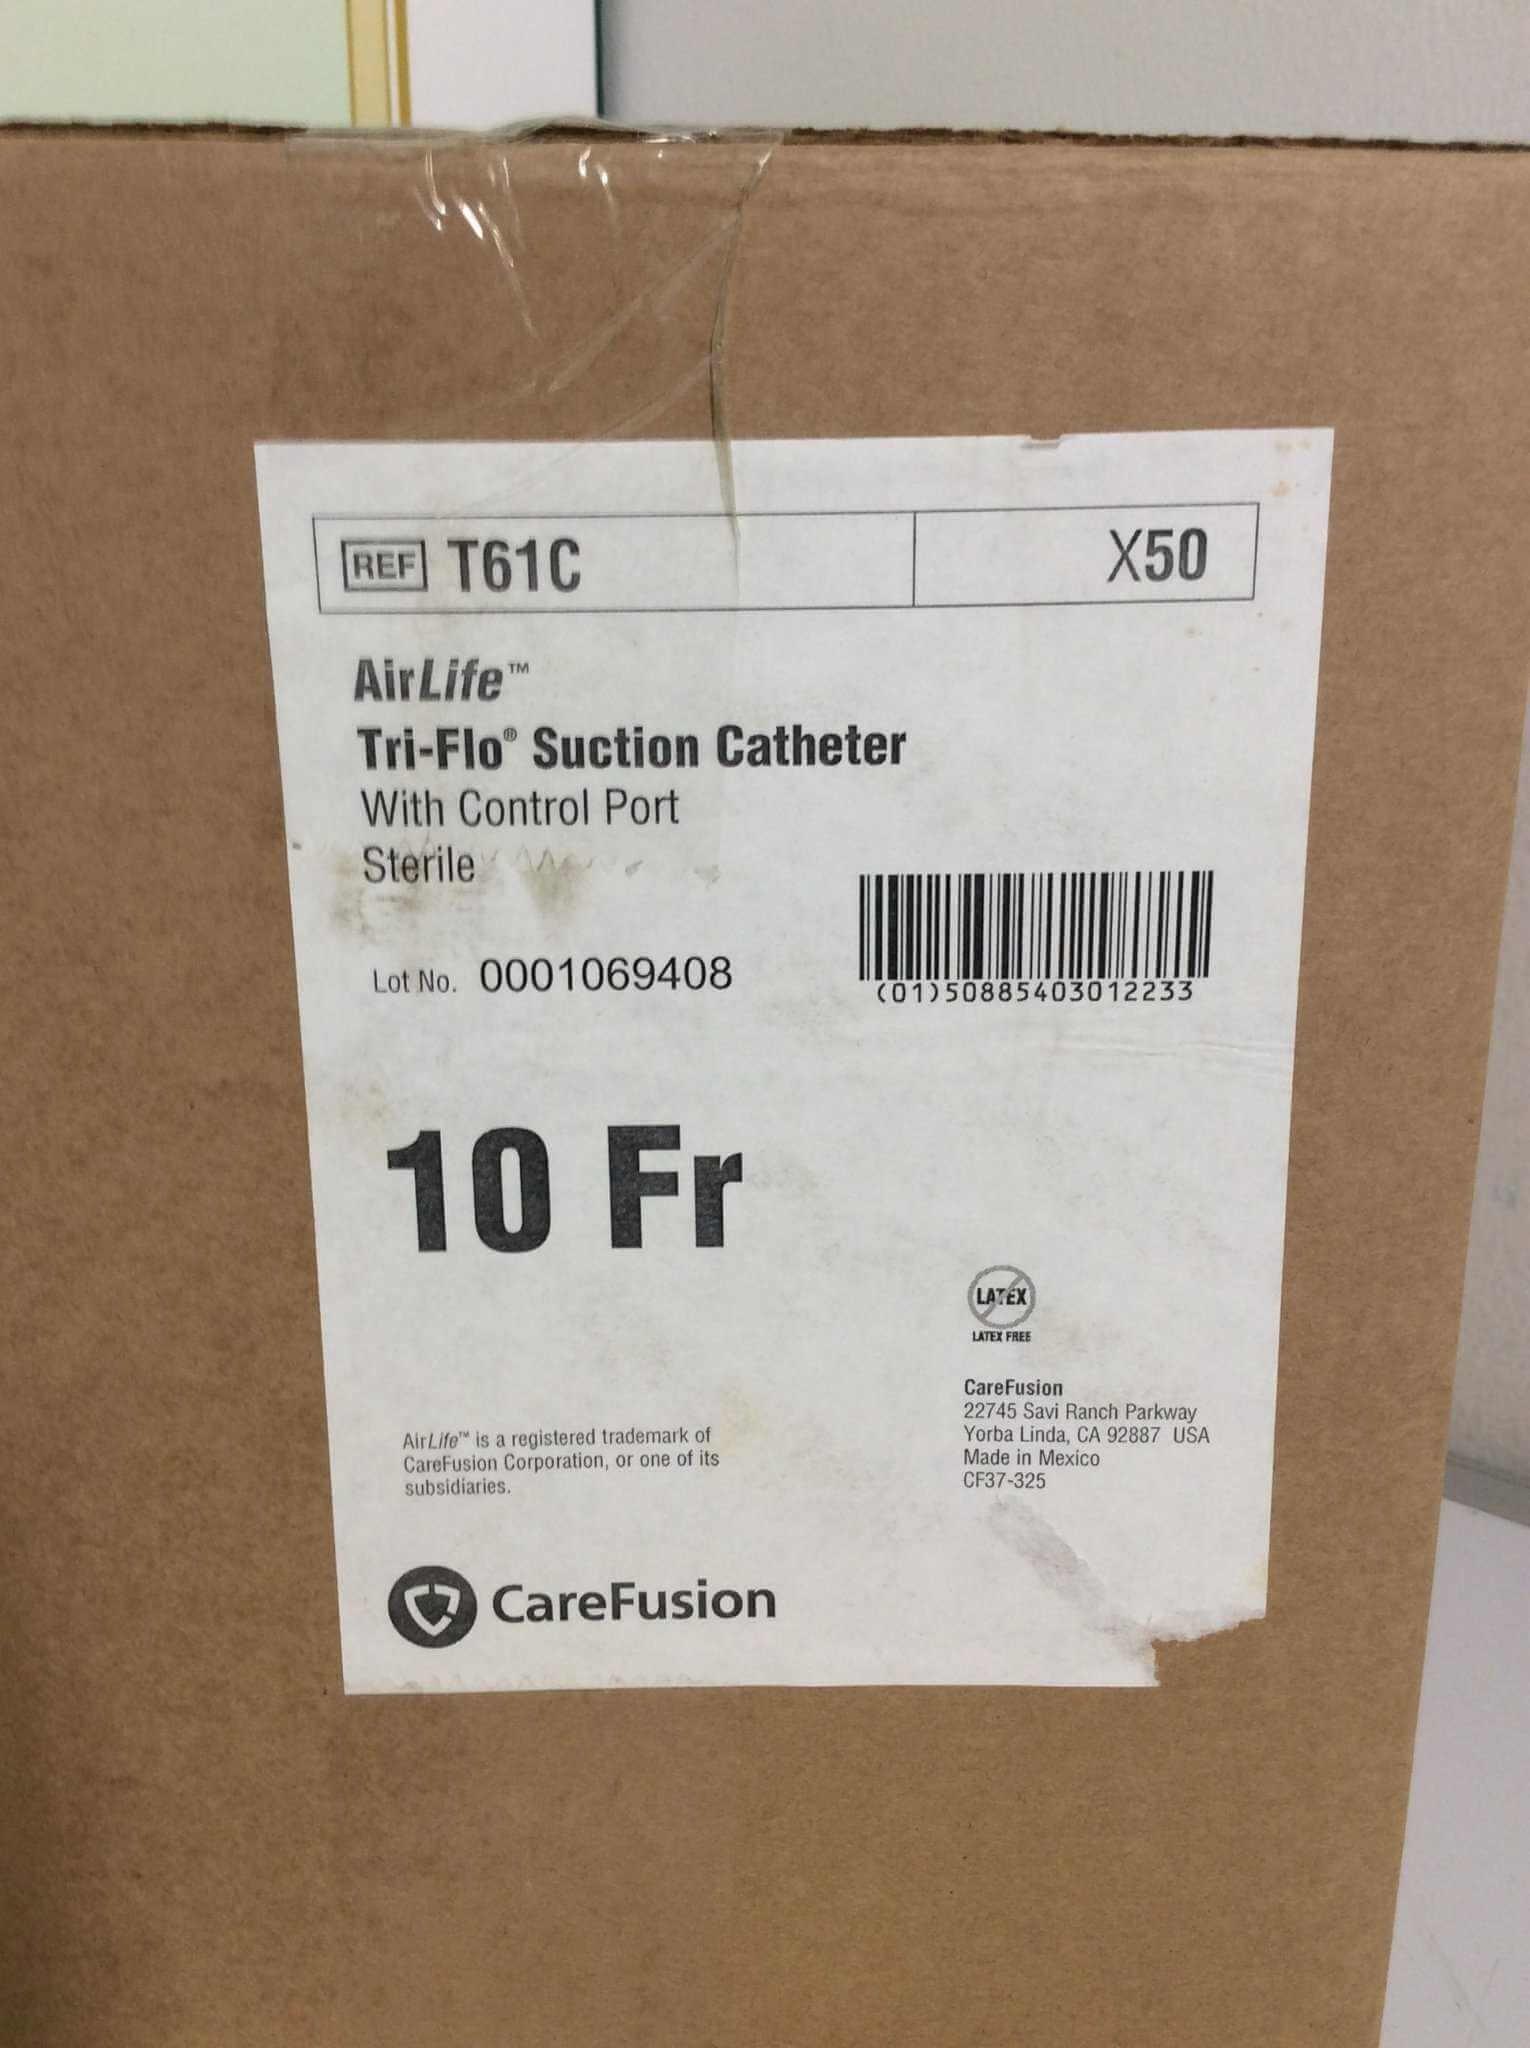 Case of 50 NEW CareFusion AirlLfe Tri-Flo Suction Catheters 10 Fr T61C - MBR Medicals